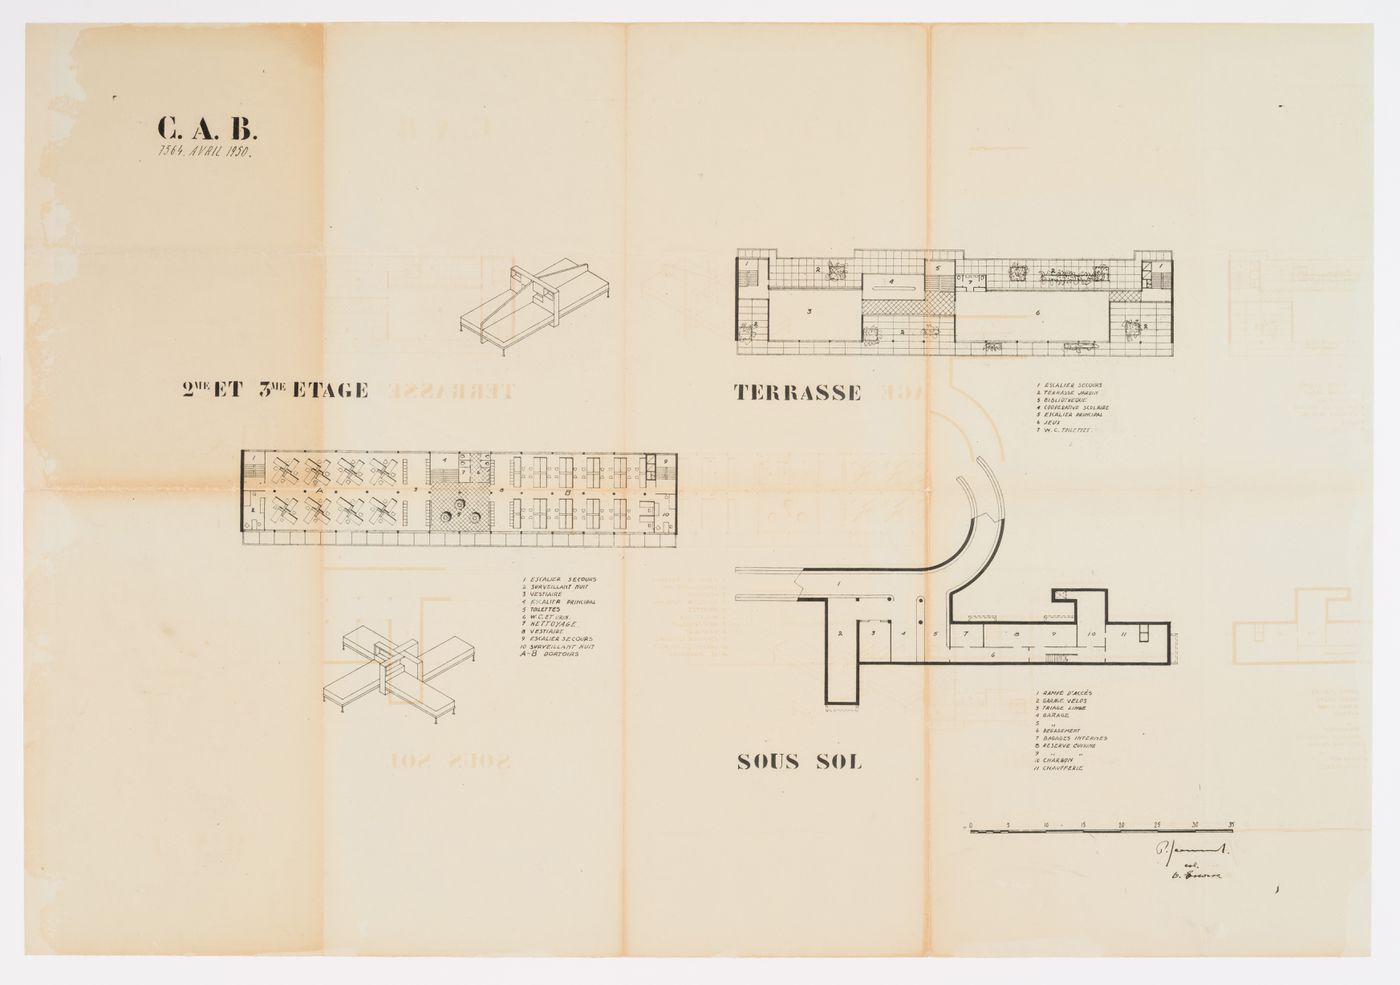 Floor plan for the Centre d'Apprentissage in Béziers, France